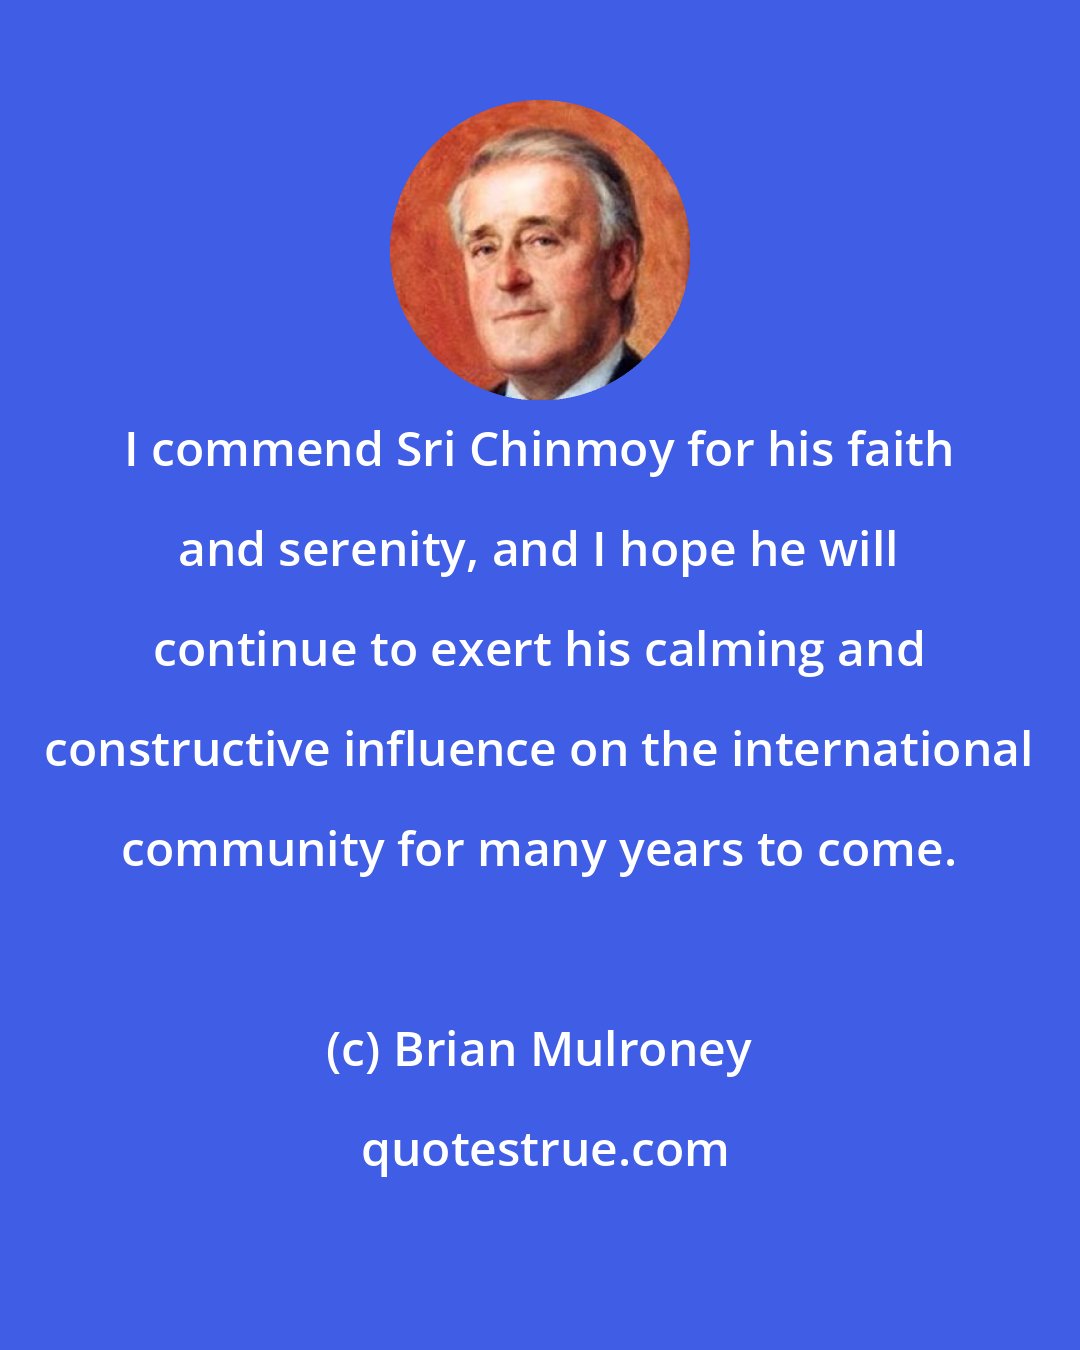 Brian Mulroney: I commend Sri Chinmoy for his faith and serenity, and I hope he will continue to exert his calming and constructive influence on the international community for many years to come.